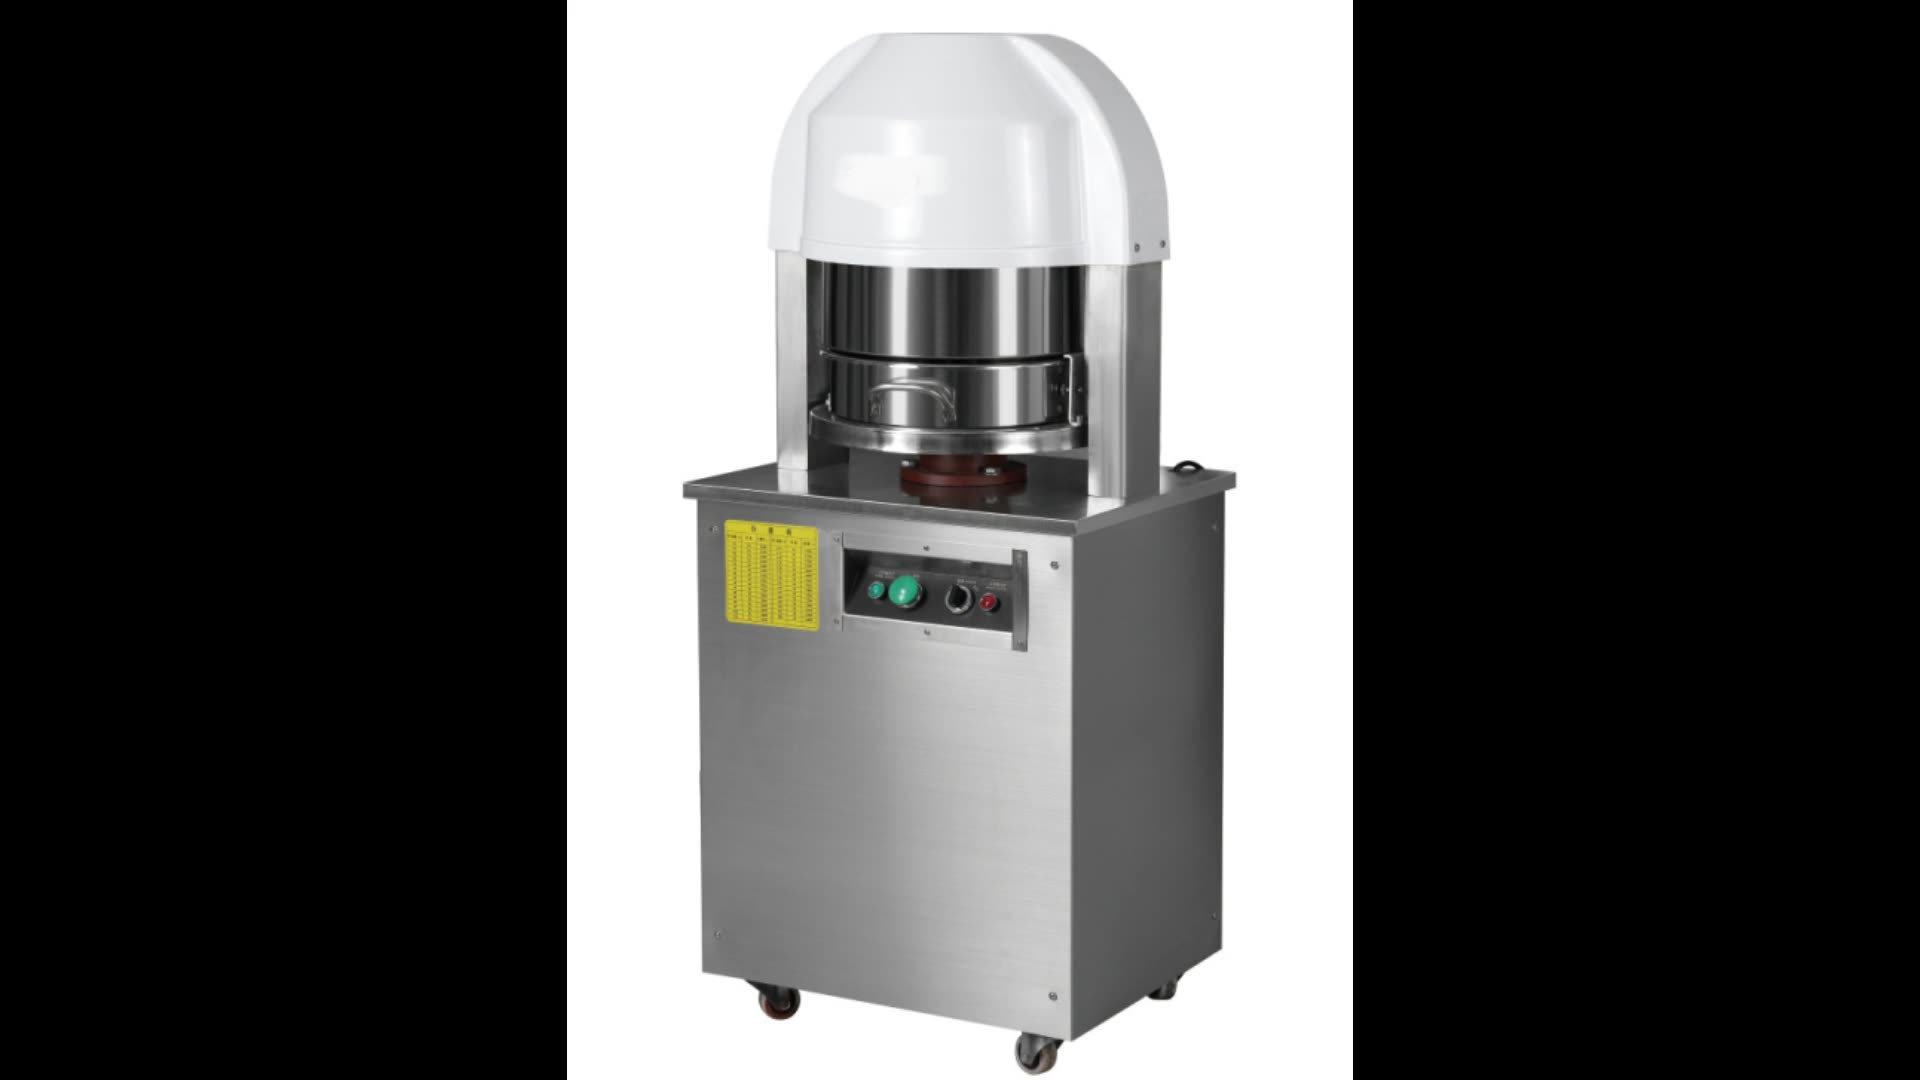 Glead Commercial Kitchen Equipment Automatic Electric Dough Divider for Bread Cutting 30 36 Pieces High Quality Economic Price1